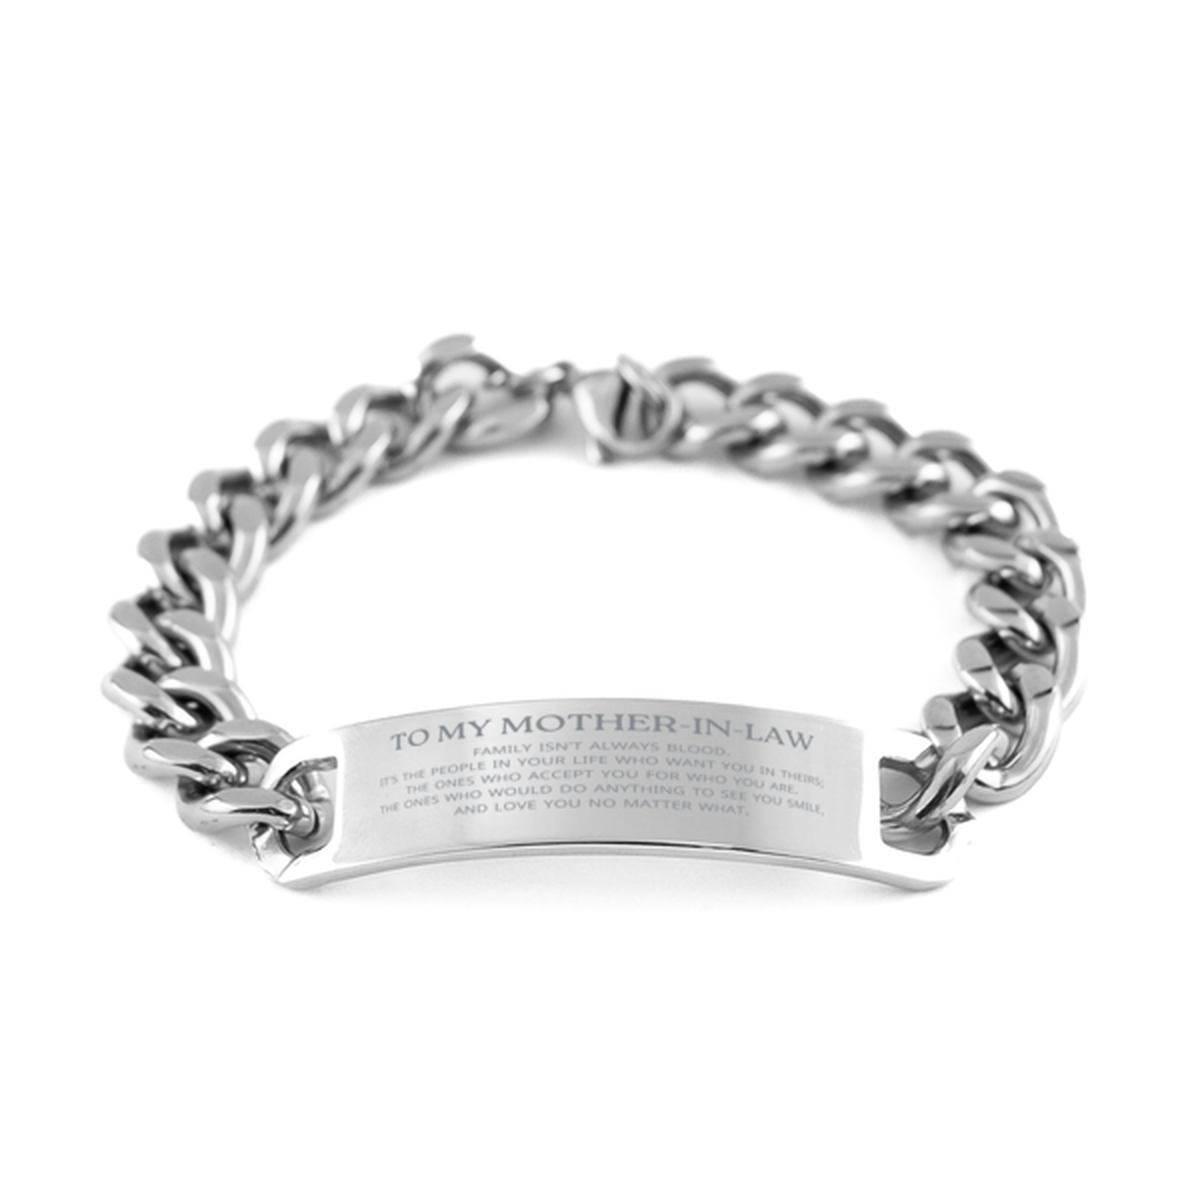 To My Mother-In-Law Gifts, Family isn't always blood, Mother-In-Law Cuban Chain Stainless Steel Bracelet, Birthday Christmas Unique Present For Mother-In-Law